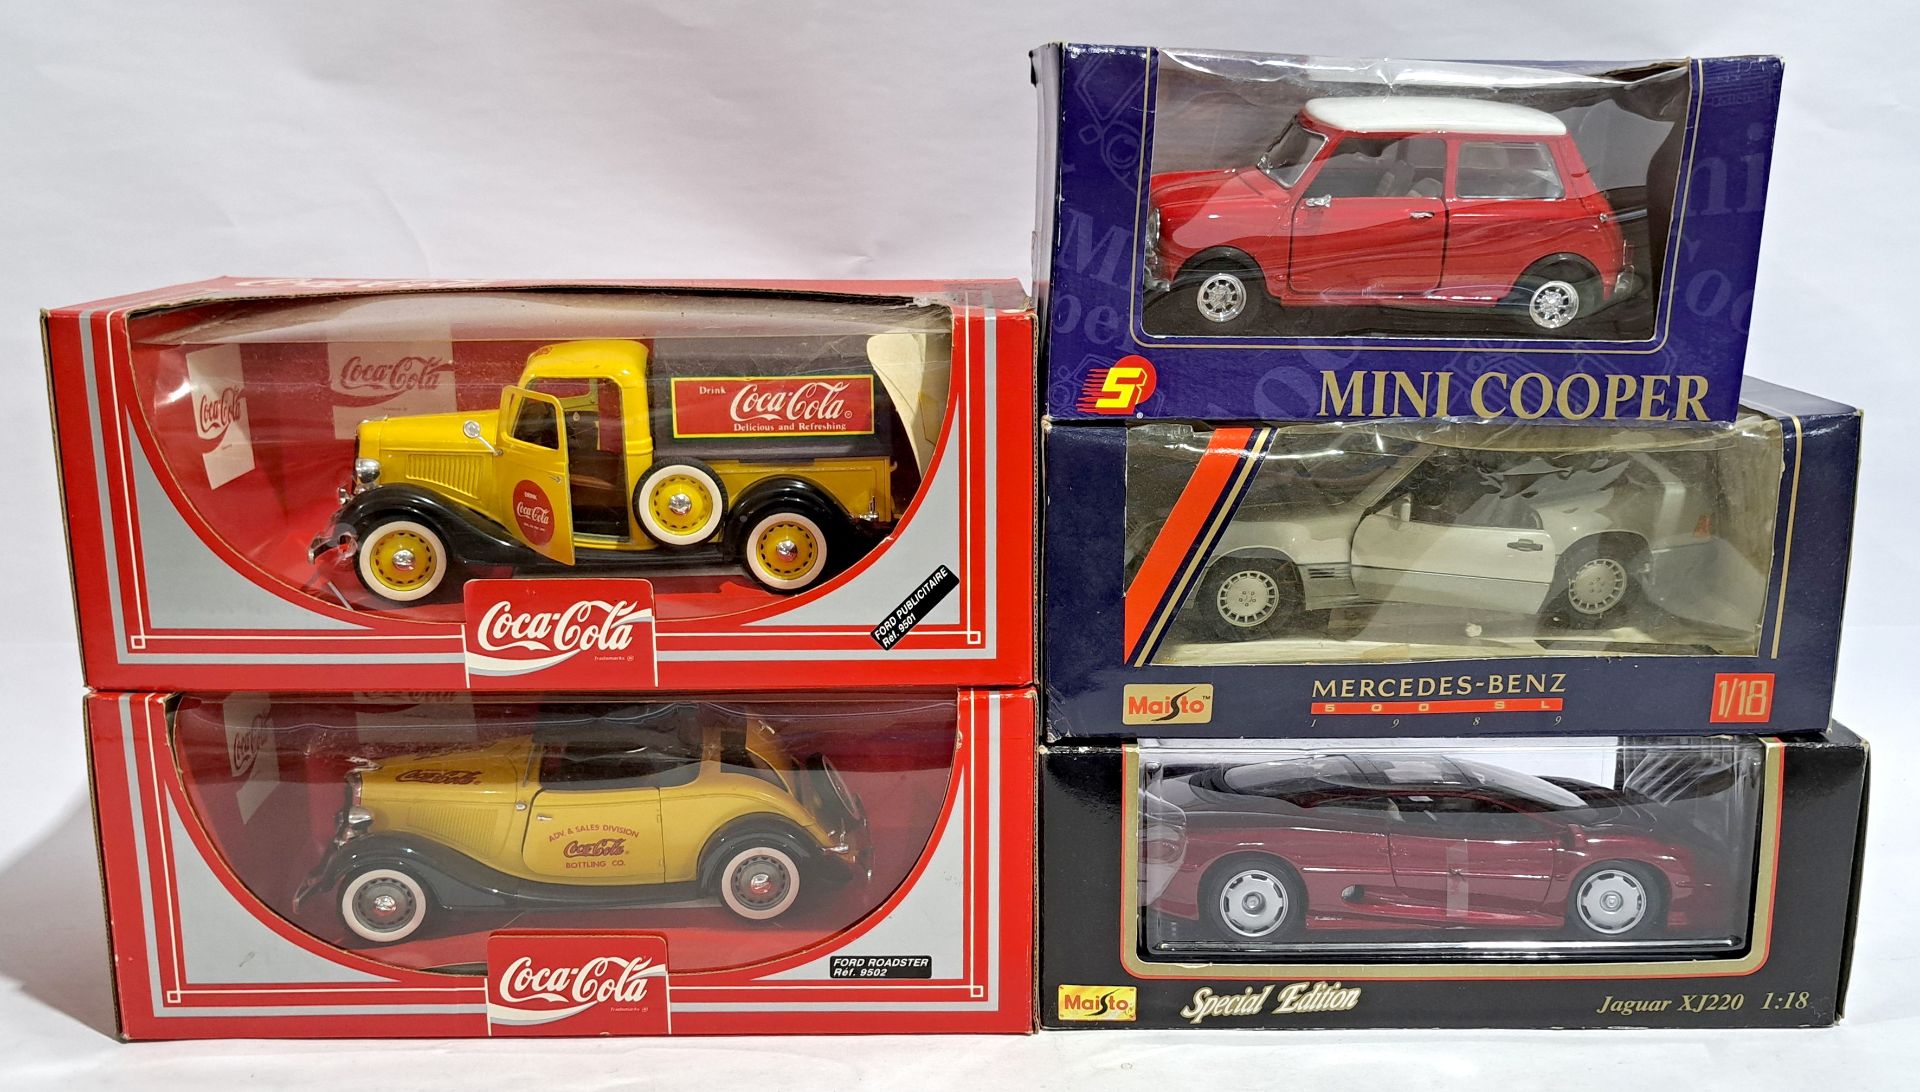 Maisto 1:18 scale & similar, a boxed group of vehicles